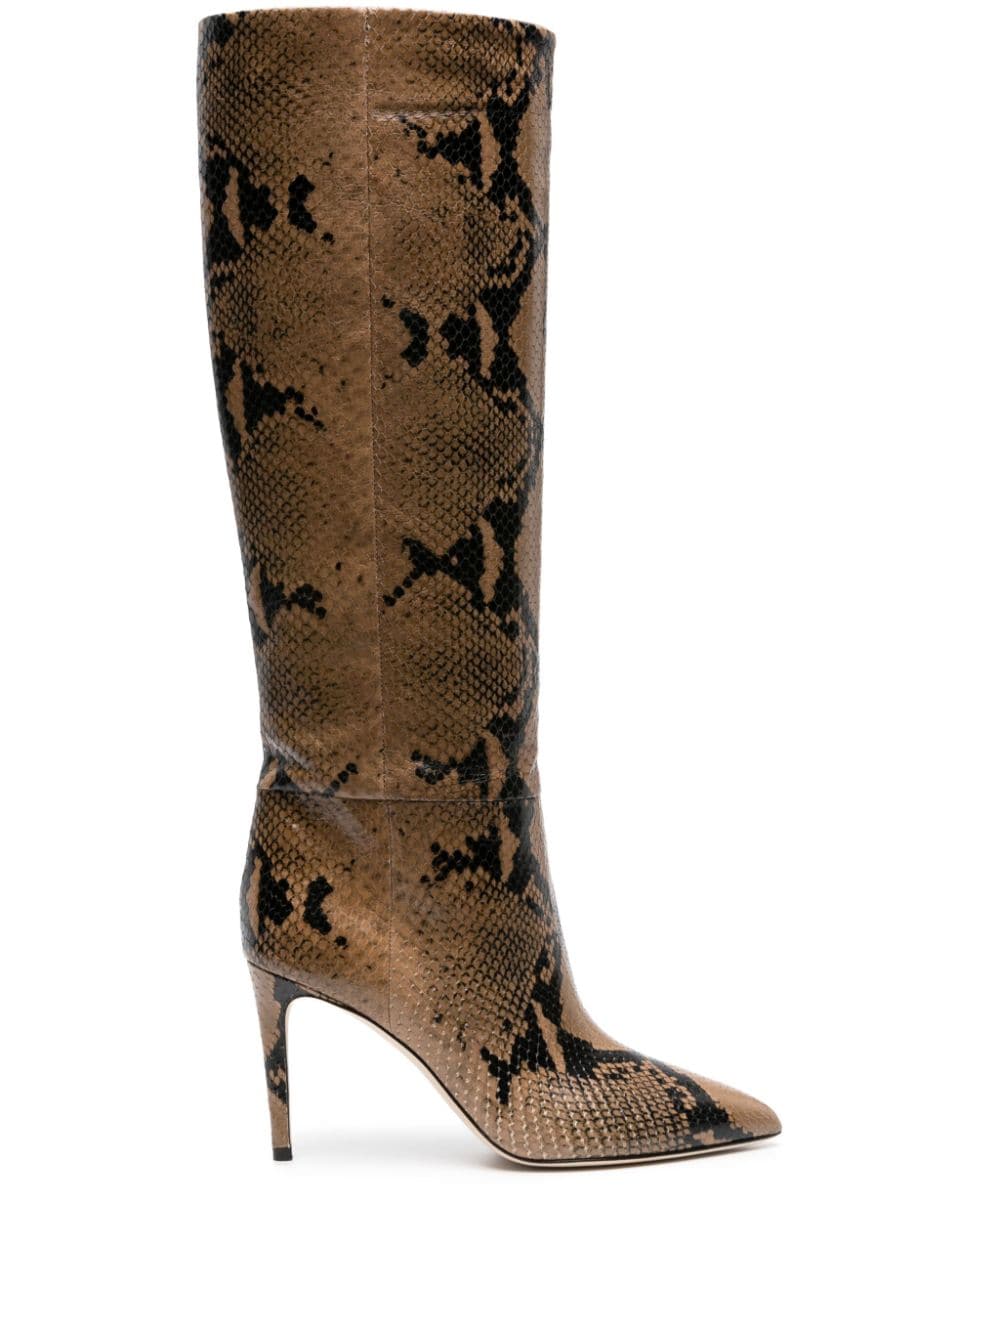 Paris Texas 85mm snakeskin-effecy leather boots - Nude